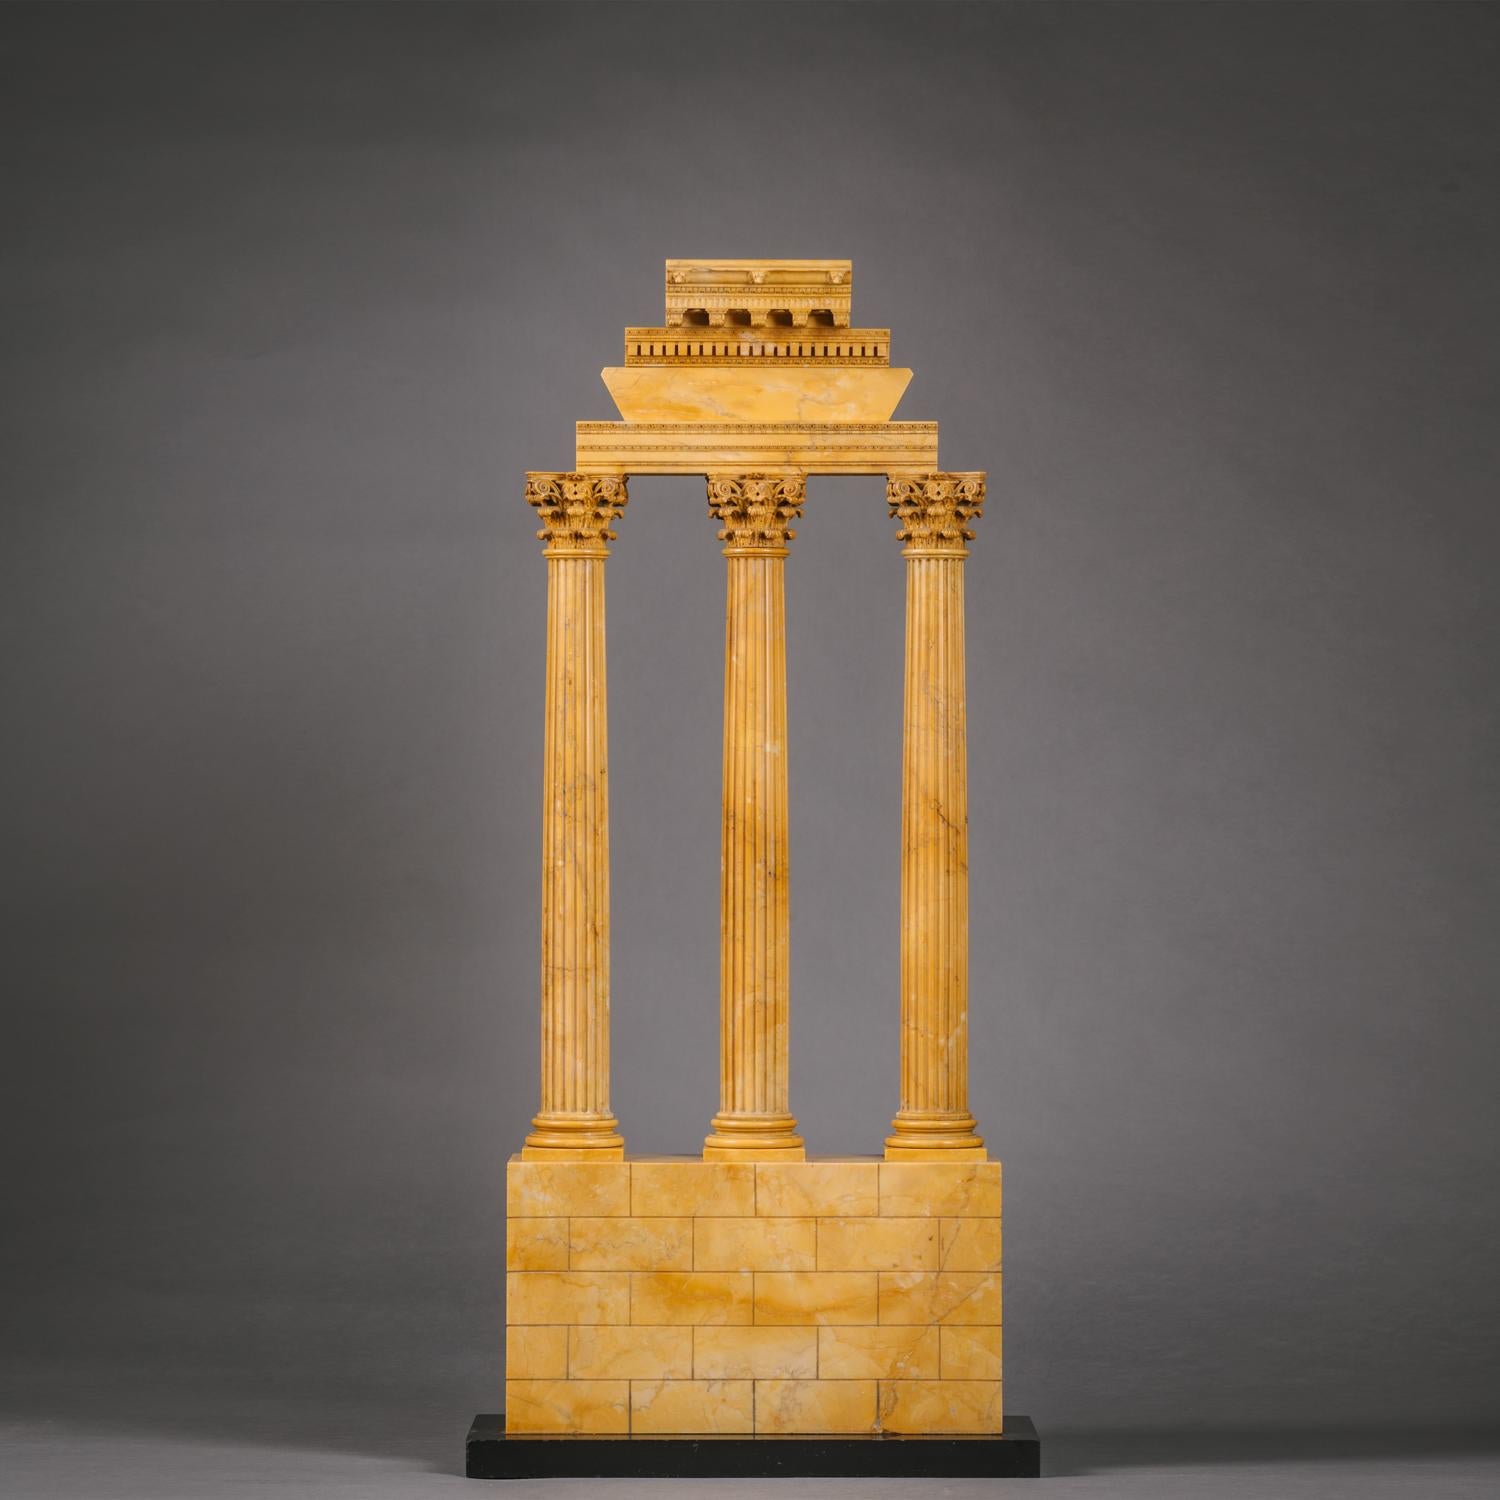 A Large Pair of Giallo Antico Marble ‘Grand Tour’ Models of Ruins Celebrating the Corinthian Order, Attributed To The Workshop Of Benedetto Boschetti.

The Temple of Castor and Pollux of flat section with three Corinthian columns supporting inverted